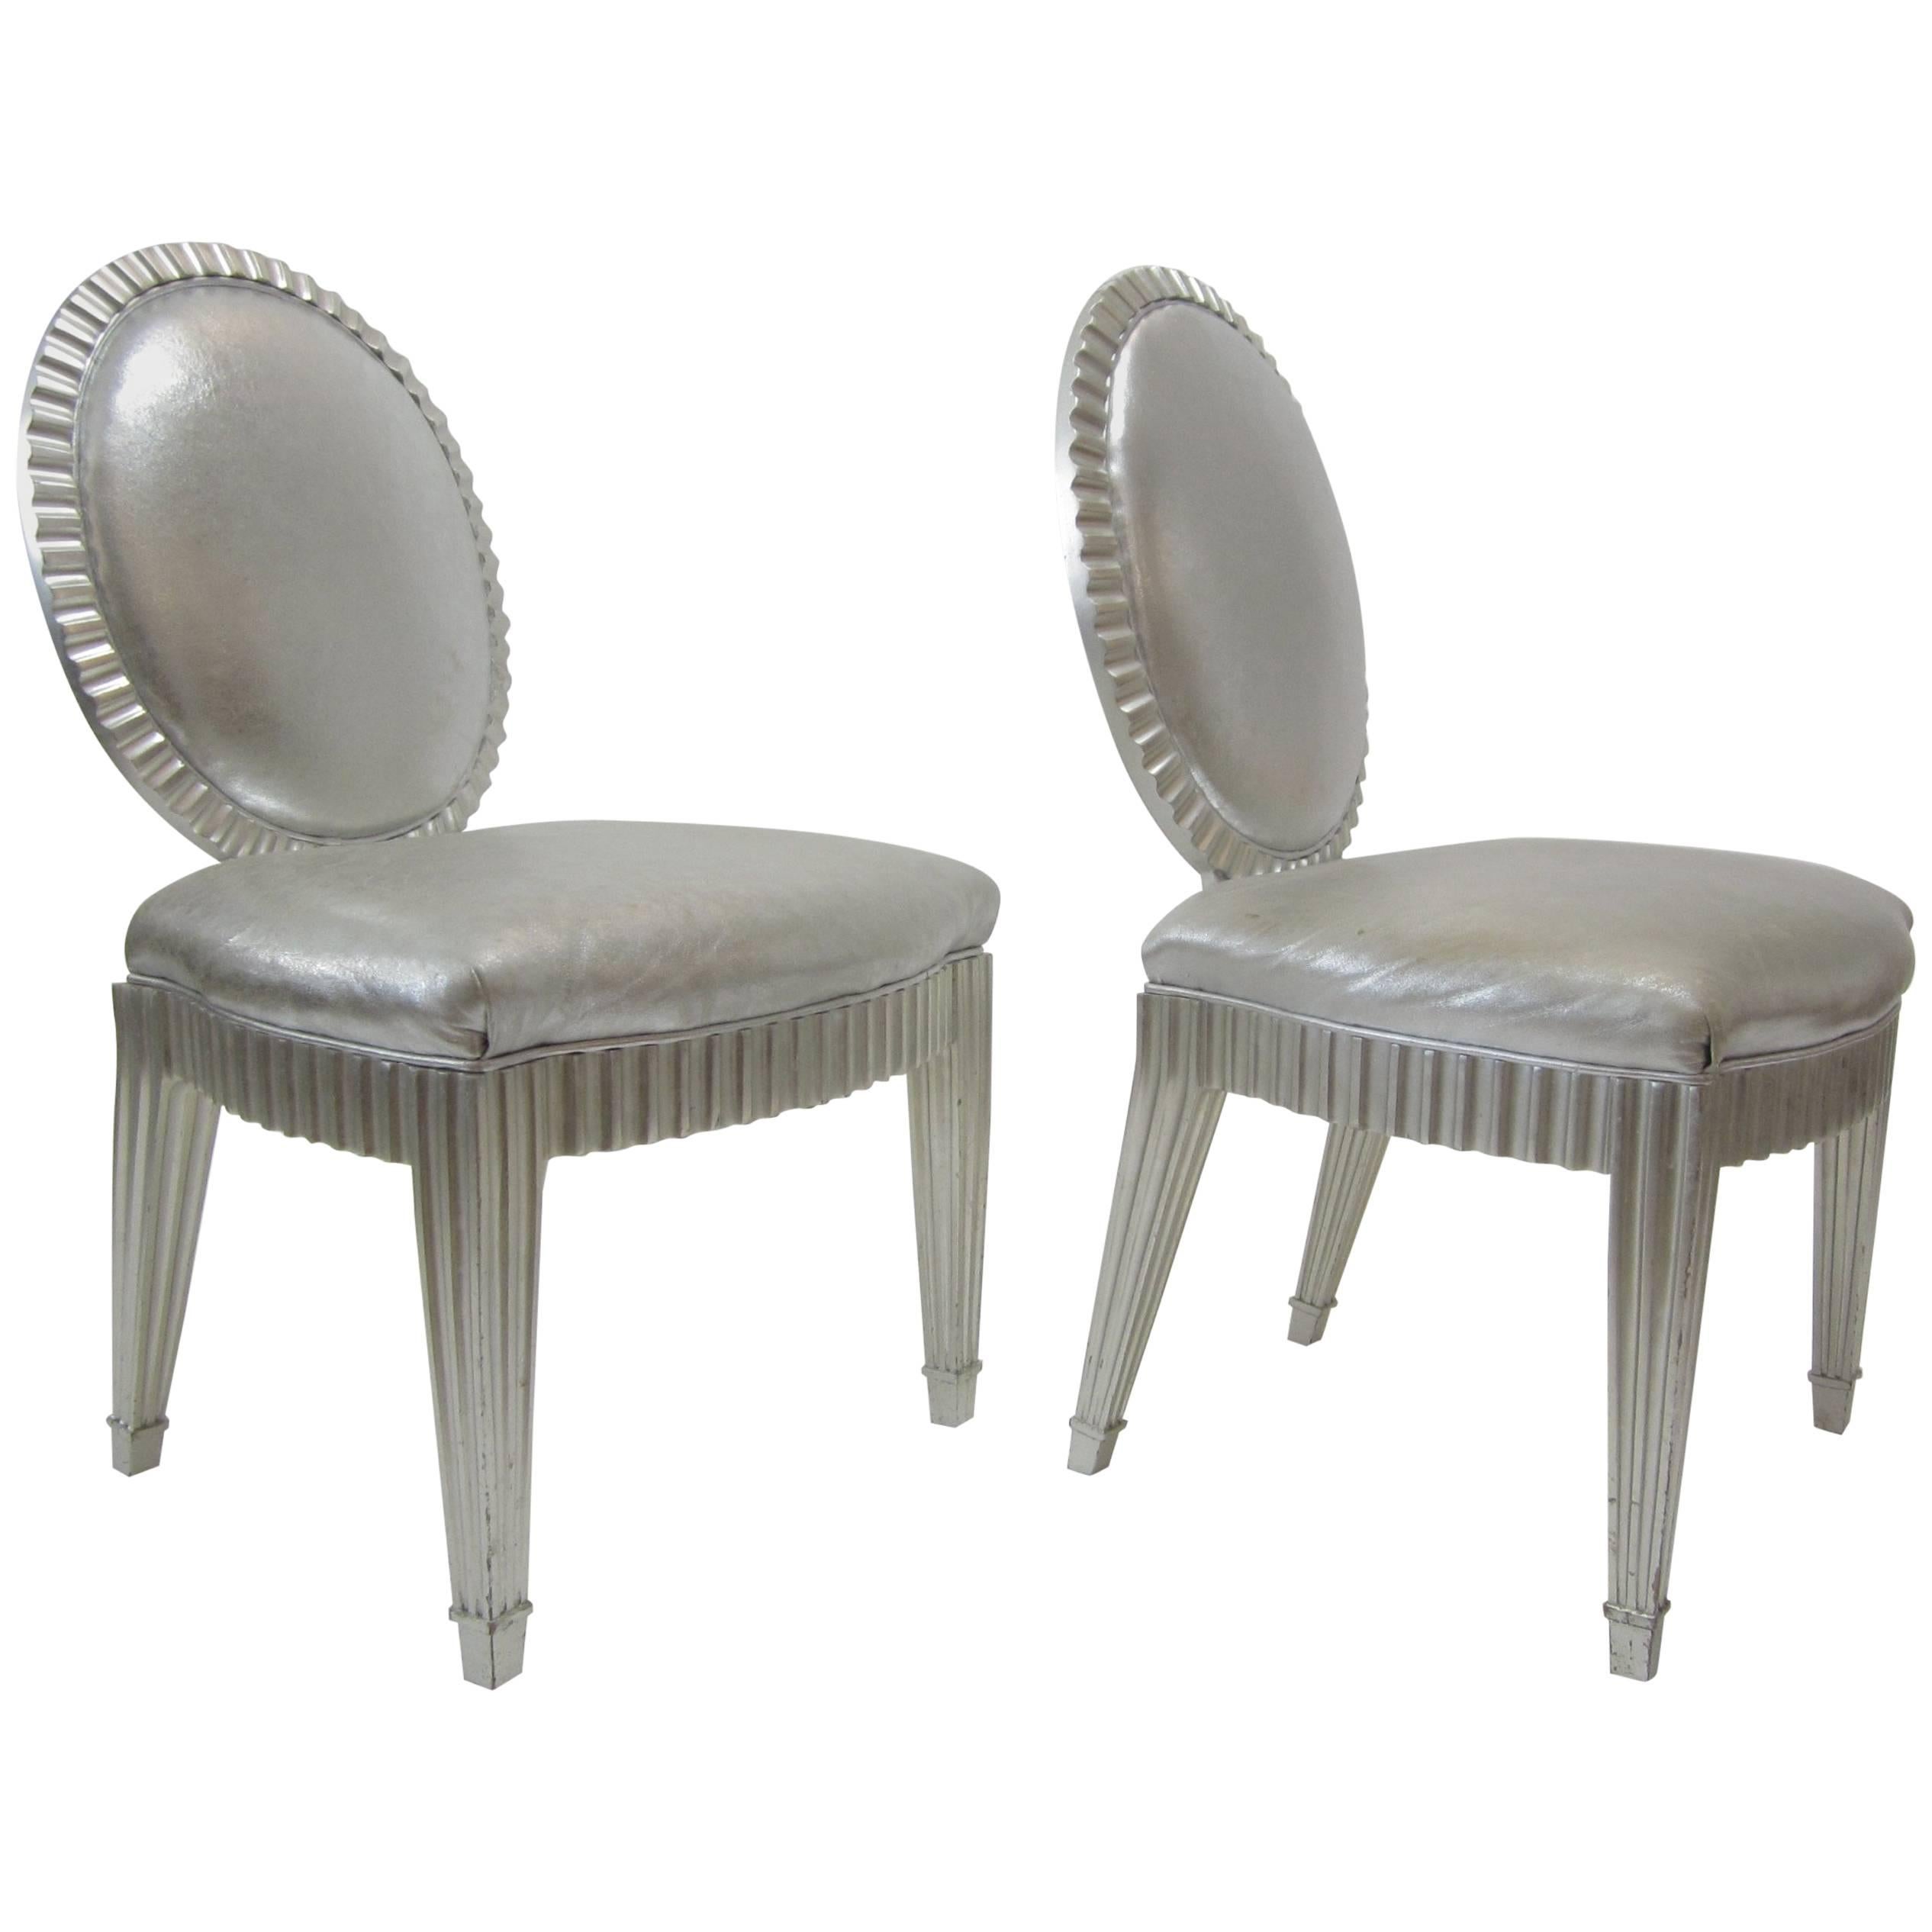 Pair of Silver Leaf and Silver Metallic Leather Neoclassical Chairs by Donghia